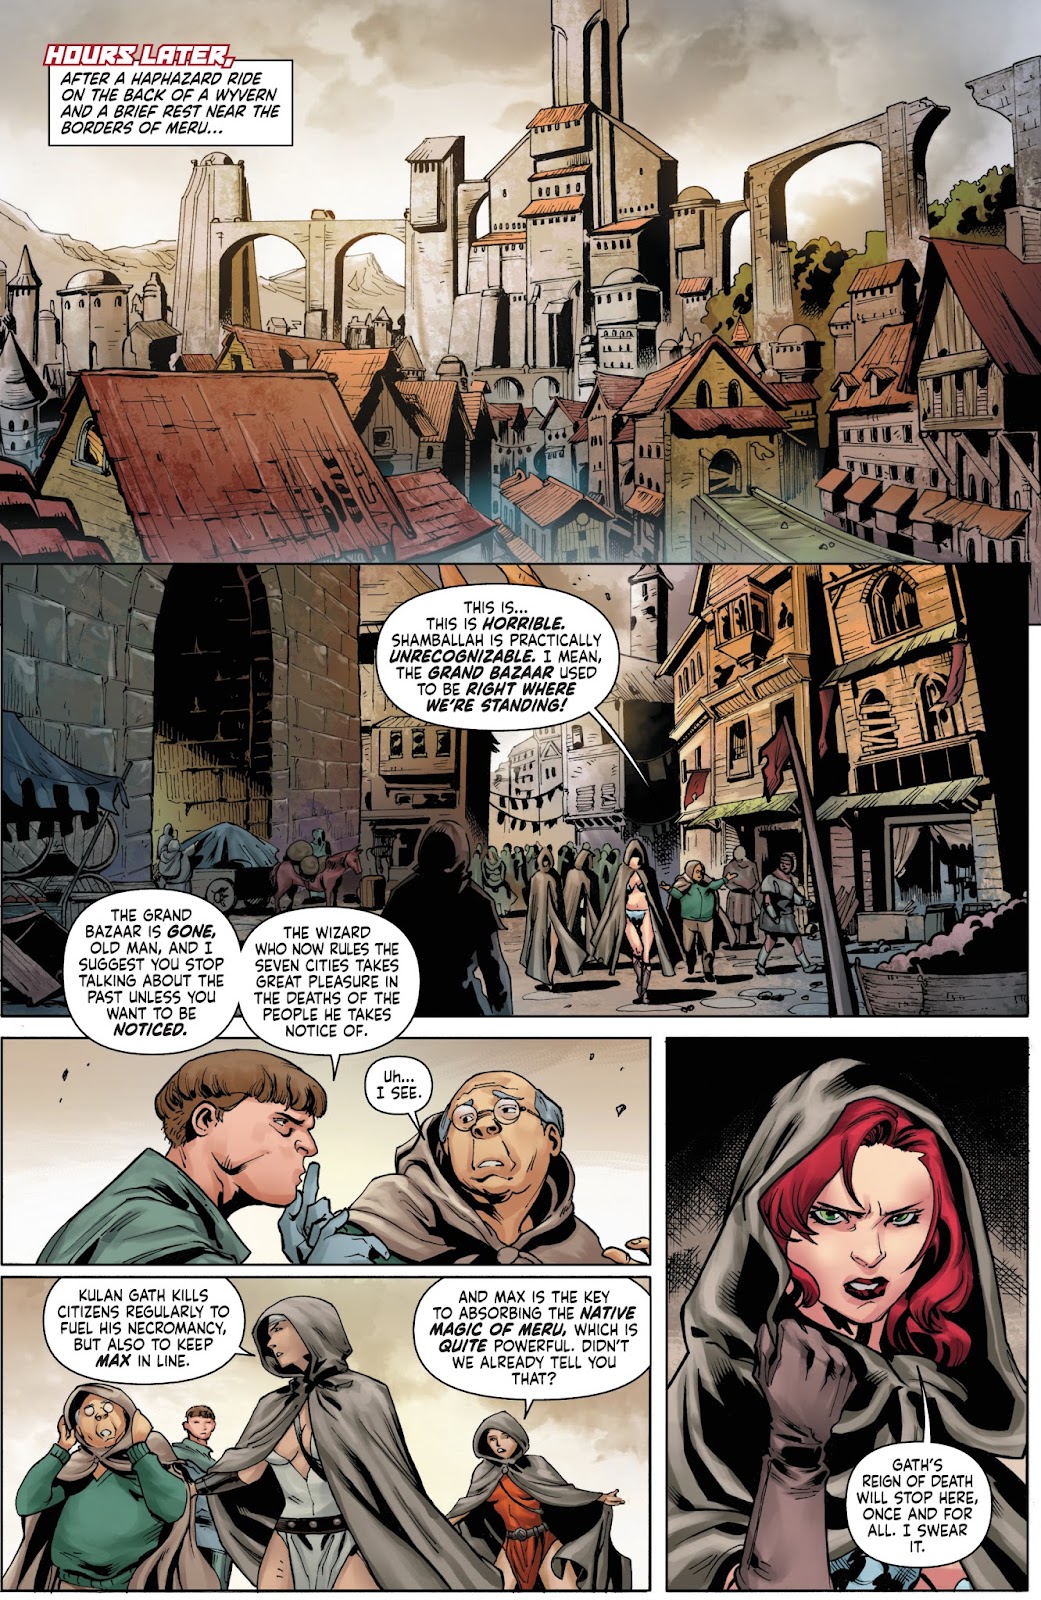 Red Sonja Vol. 4 issue 15 - Page 10